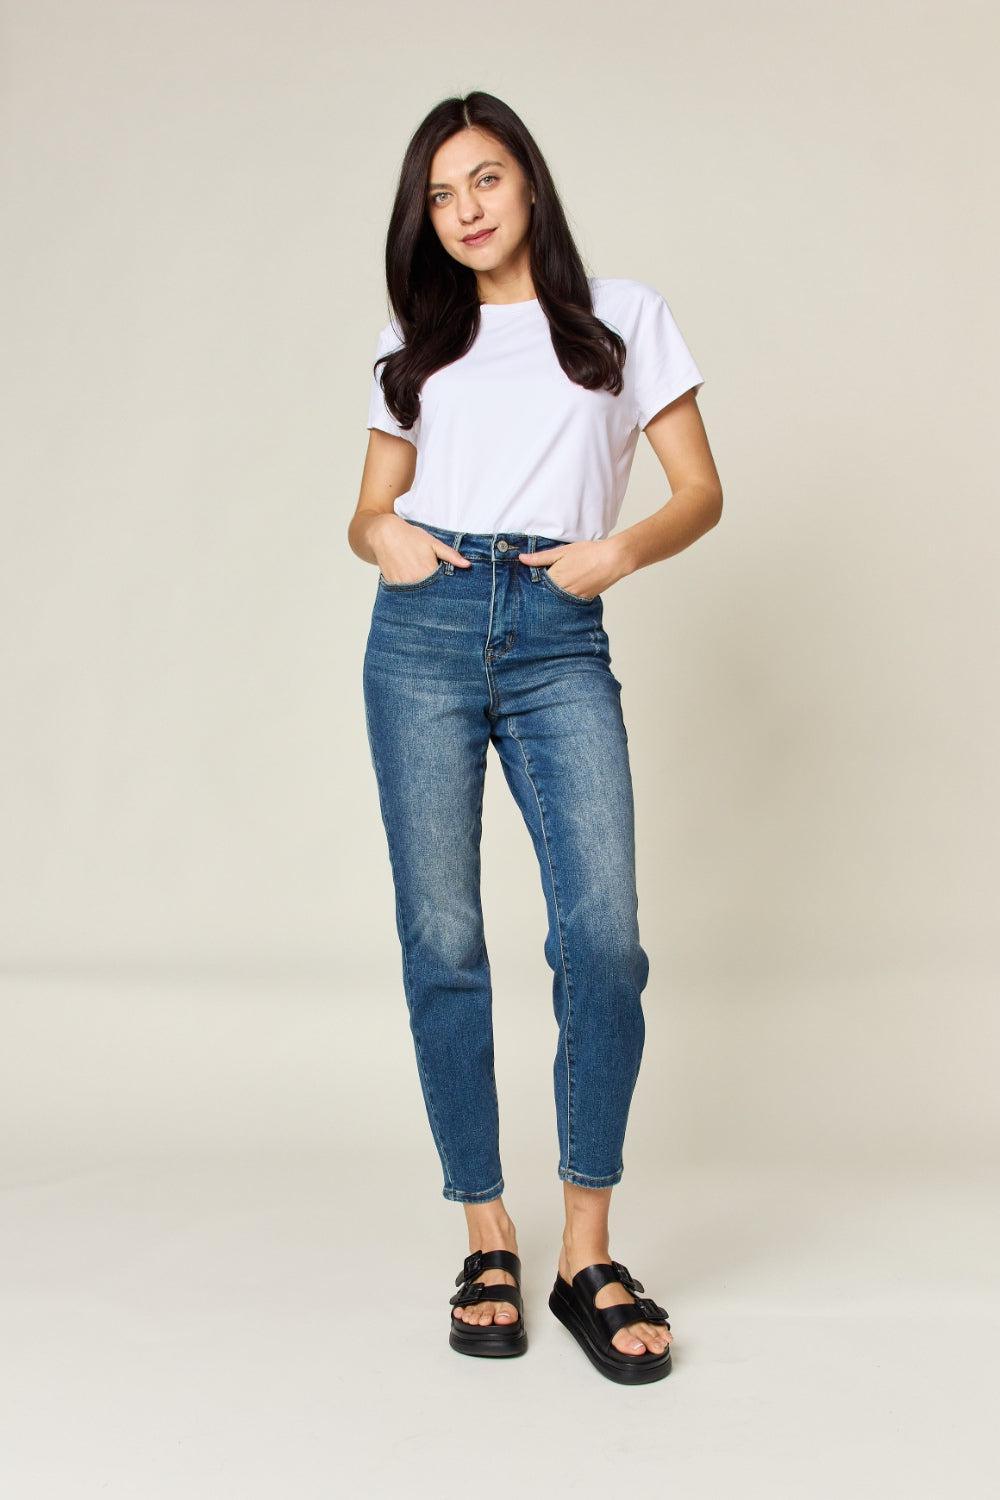 a woman in a white t - shirt and jeans